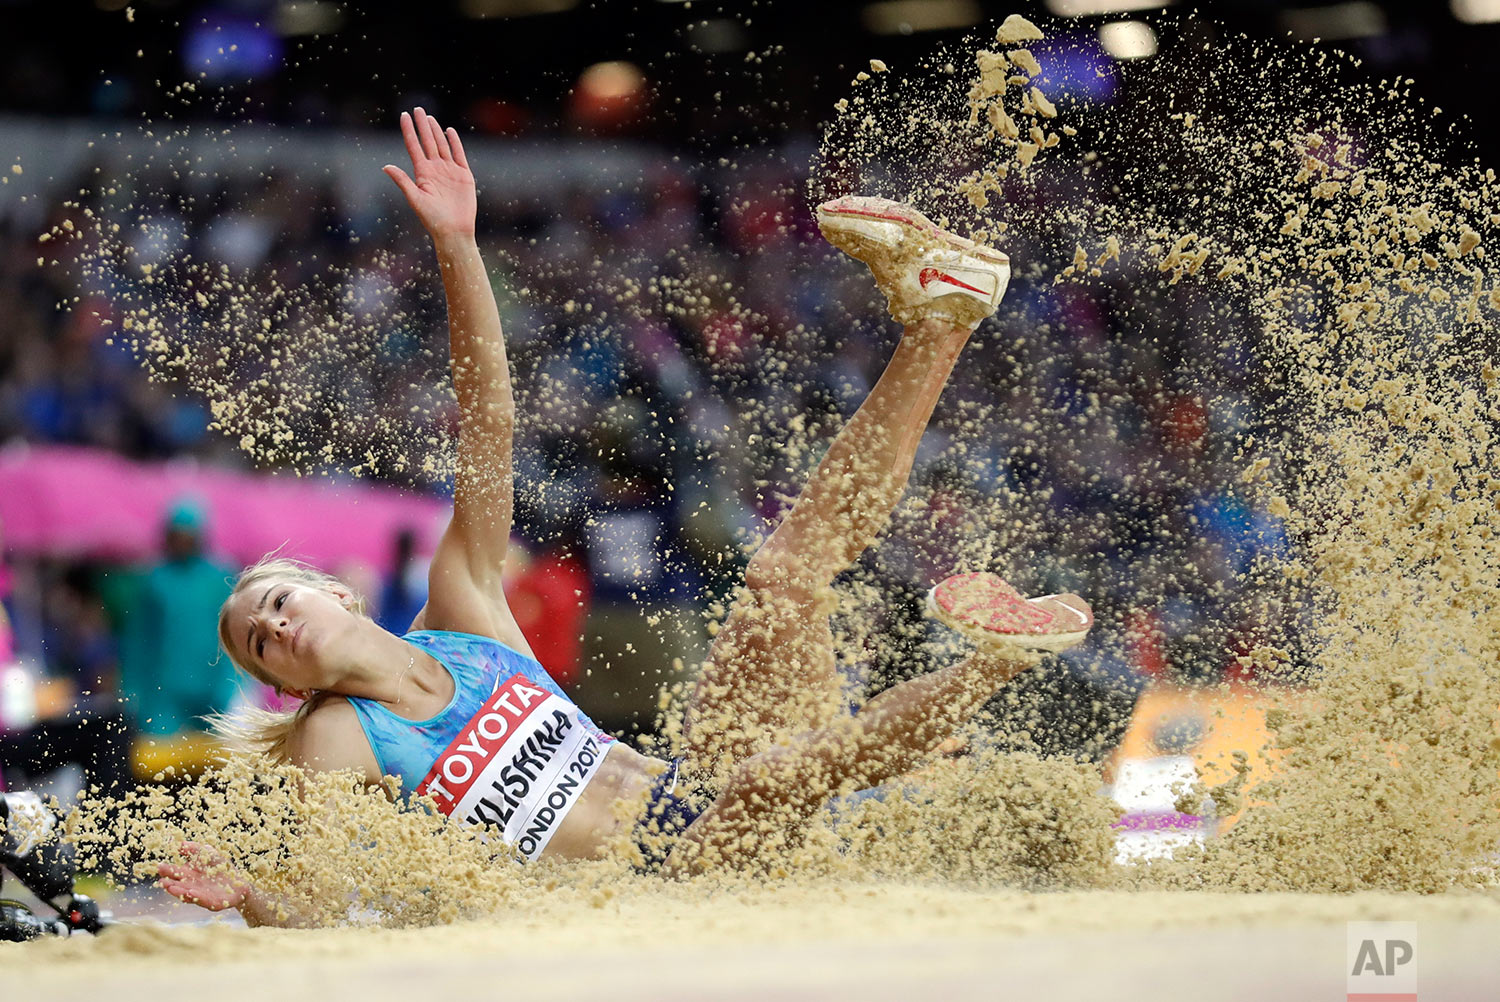  Russia's Darya Klishina makes an attempt in the women's long jump qualification during the World Athletics Championships in London Wednesday, Aug. 9, 2017. (AP Photo/Matt Dunham) 